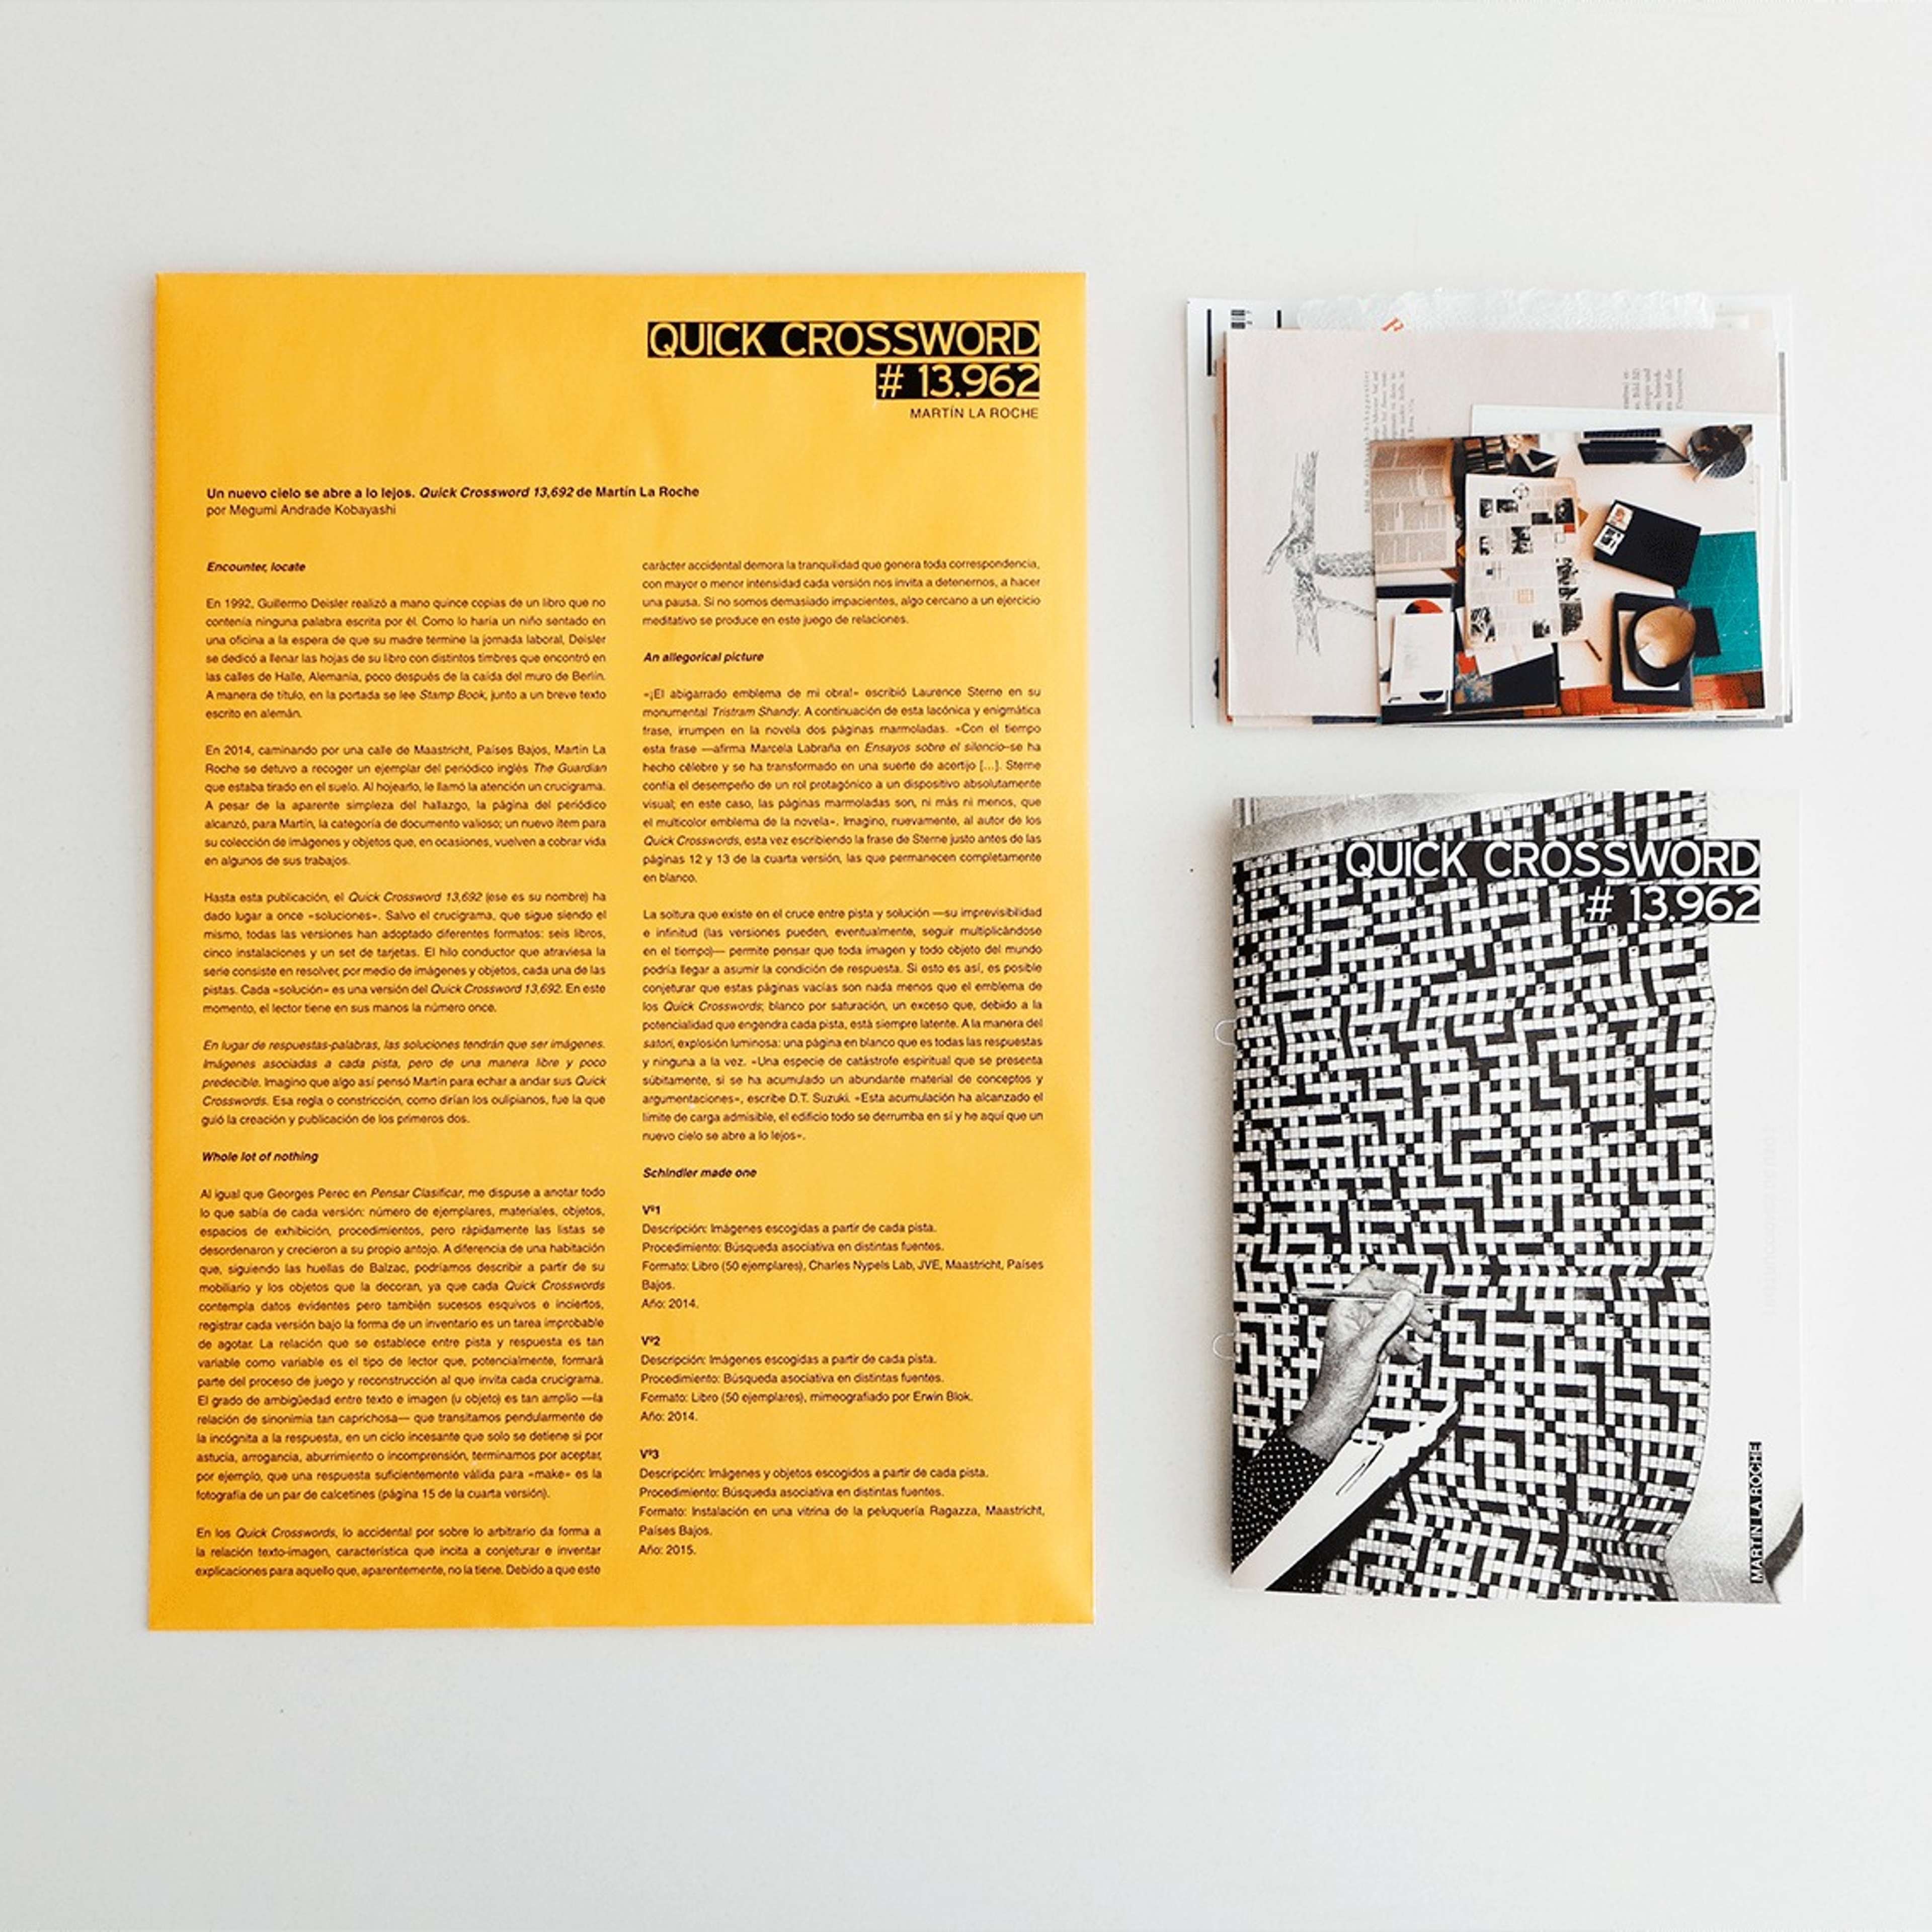 Edited and designed by Naranja Publicaciones,

Includes a text by Megumi Andrade Kobayashi.